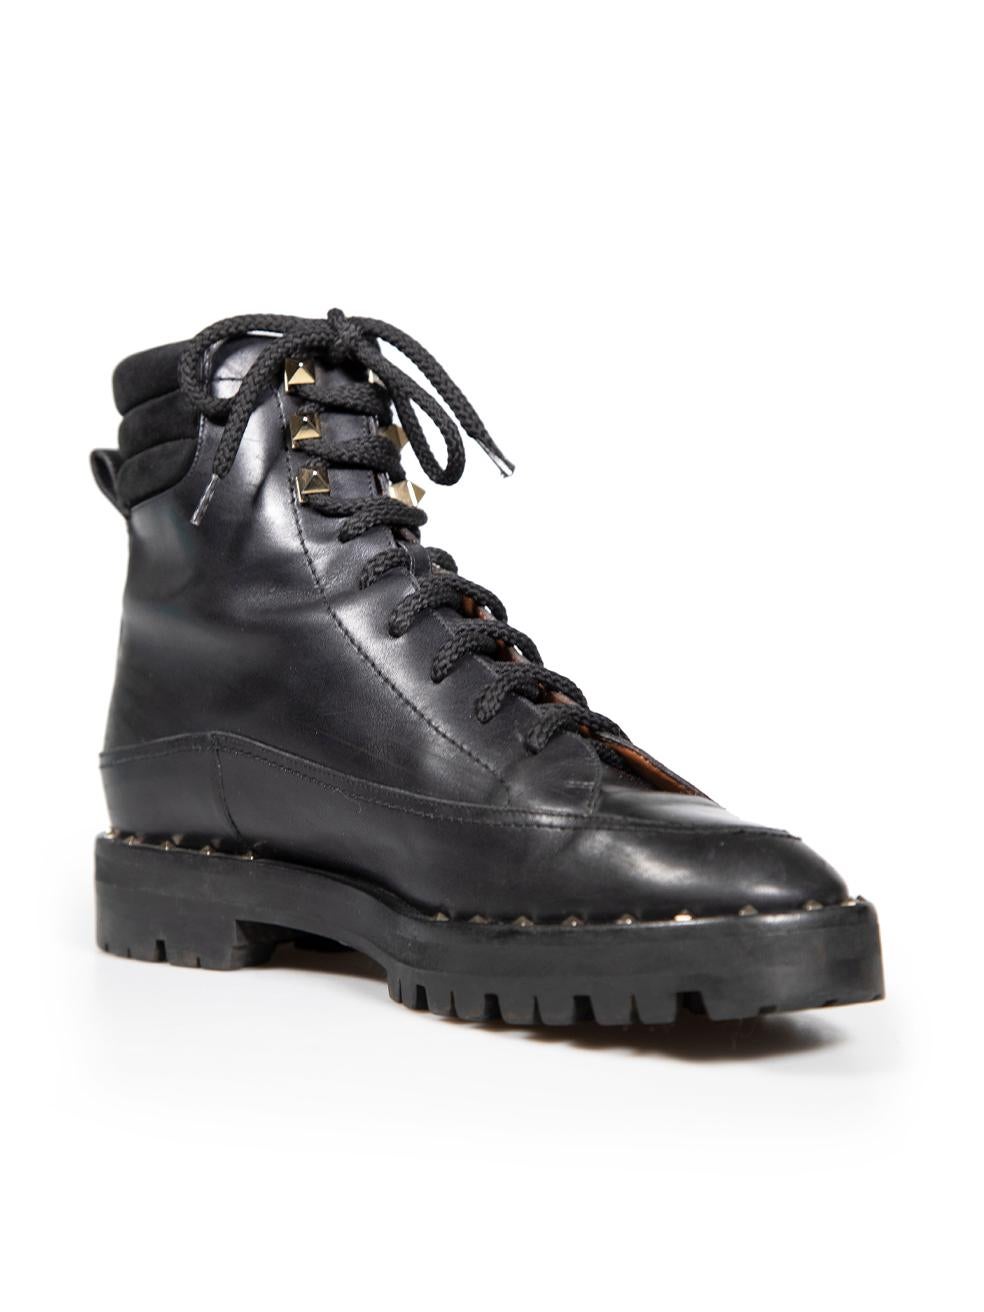 CONDITION is Very good. Minimal wear to boots is evident. Some small scratches to the toe and light wear to the soles on this used Valentino designer resale item.
 
 Details
 Black
 Leather
 Combat boots
 Silver studded detail
 Lace up fastening
 
